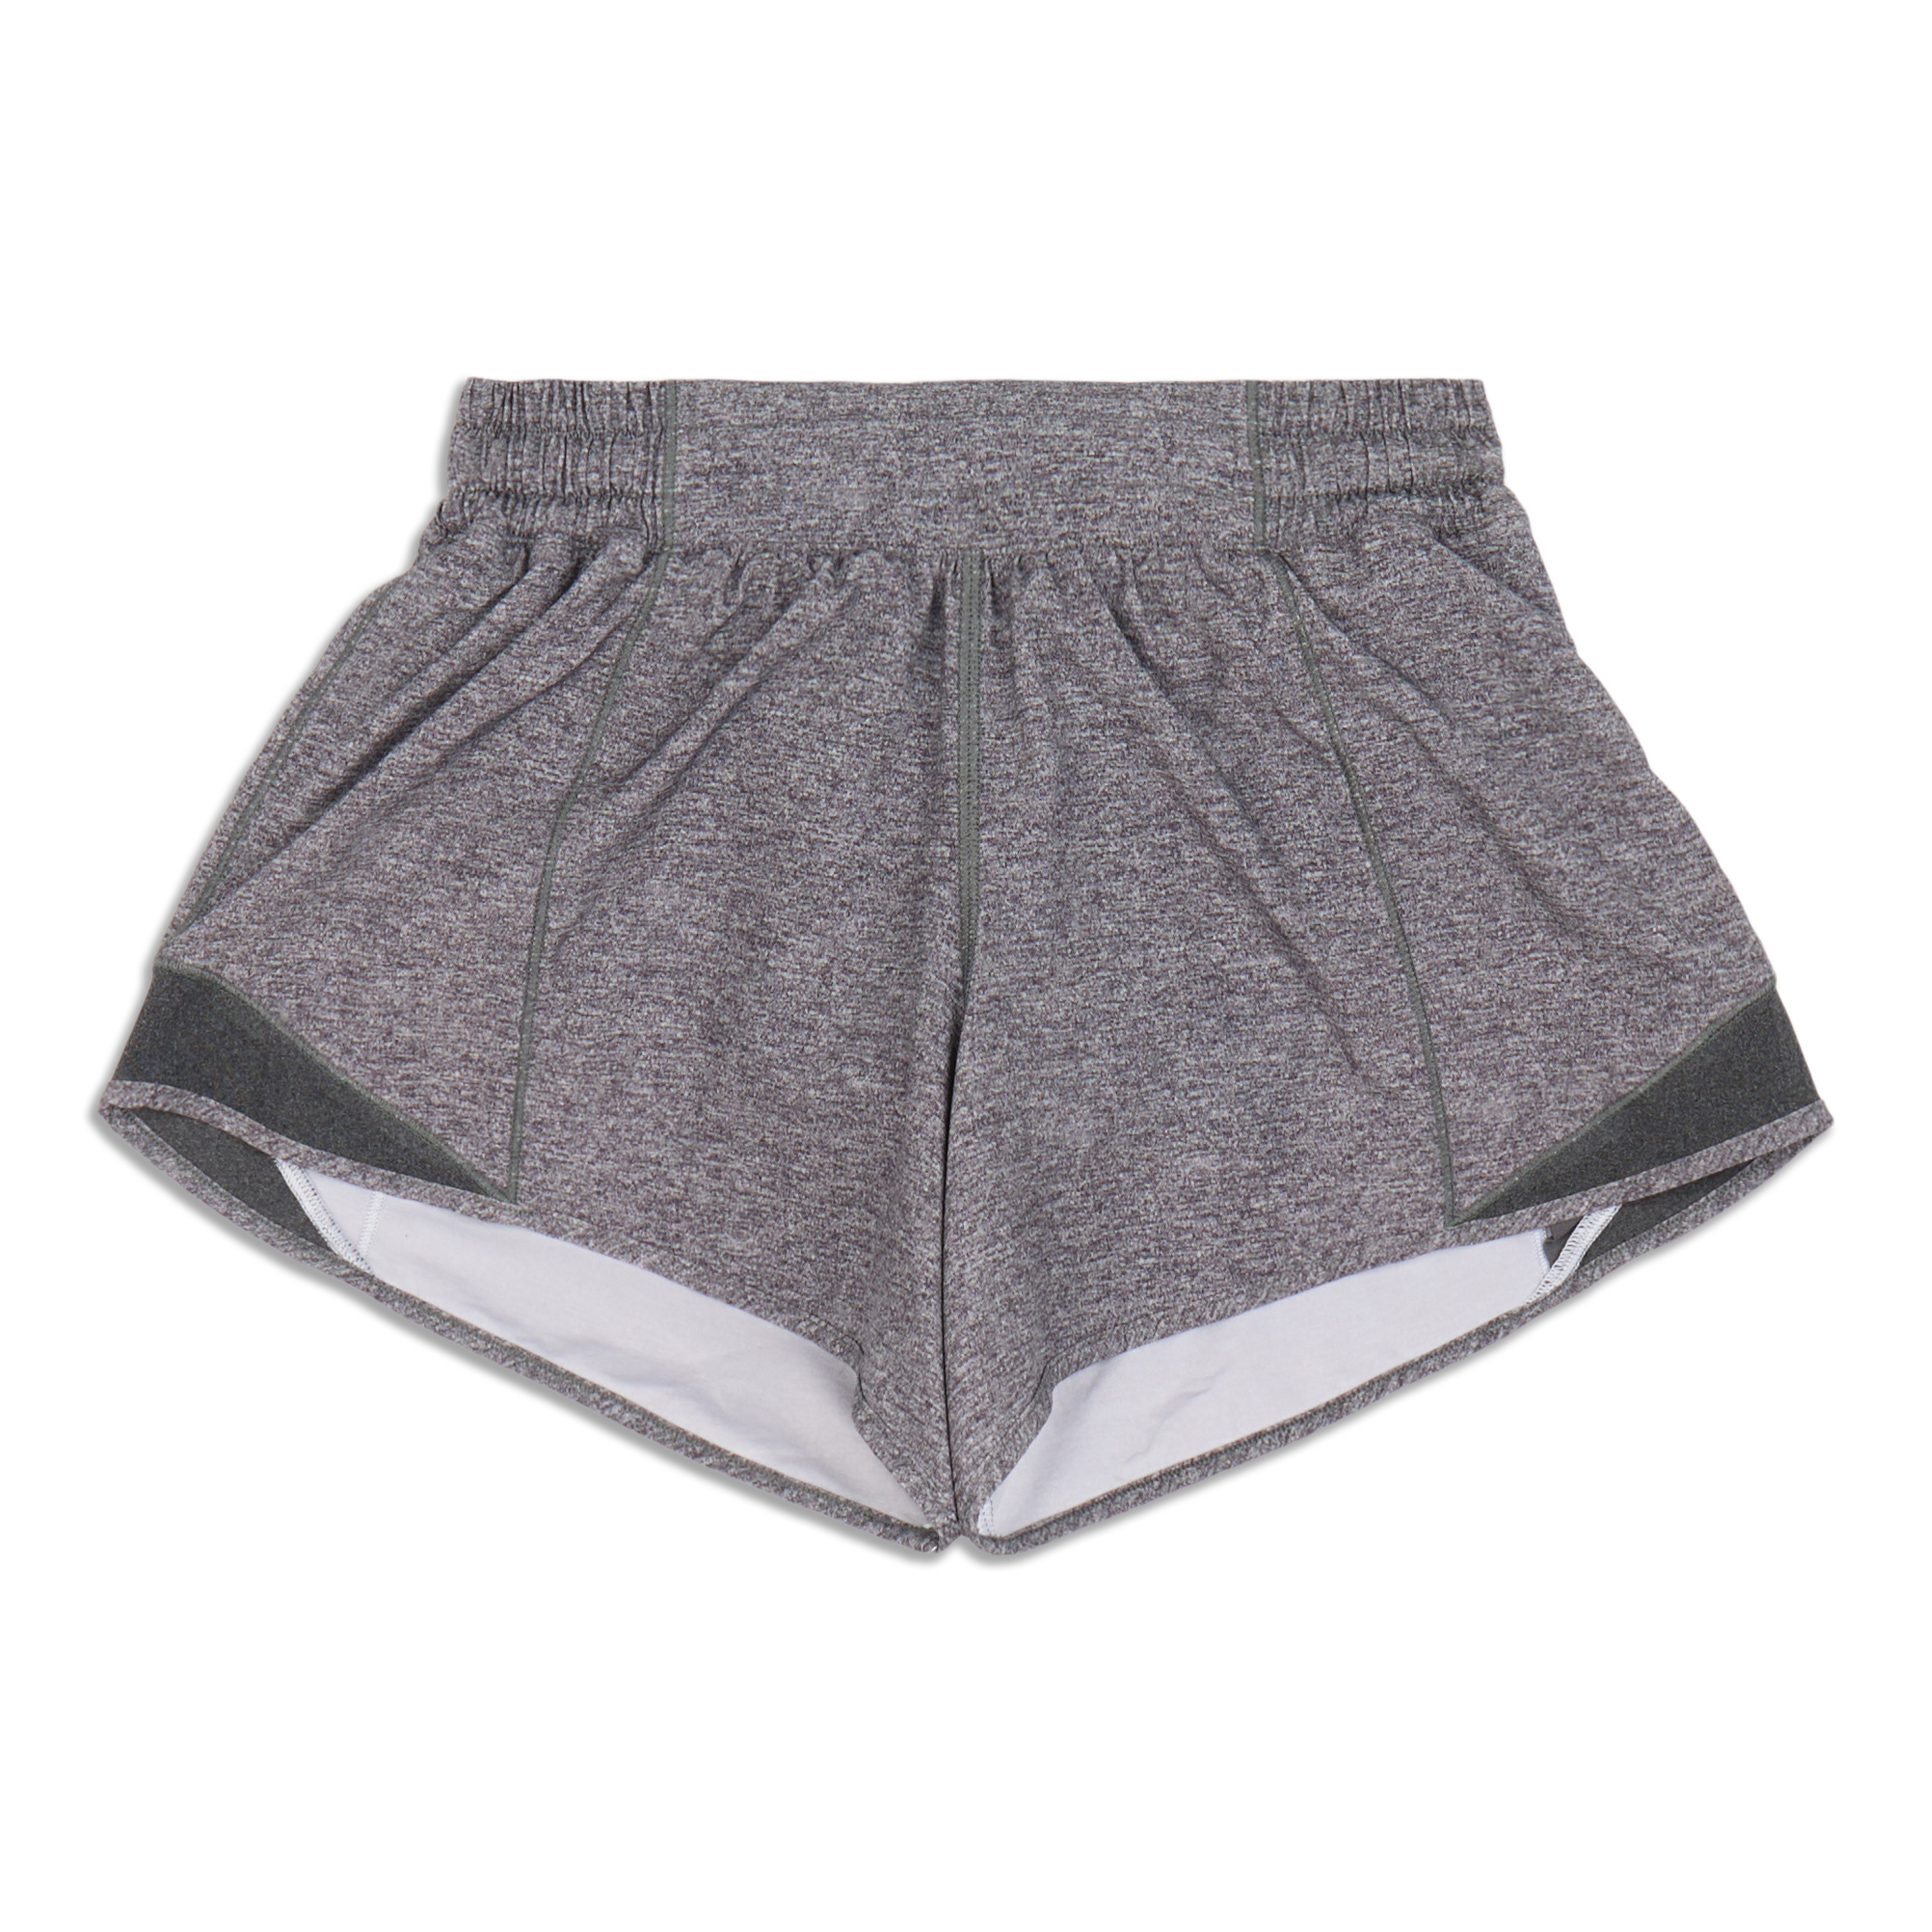 Lululemon Hotty Hot Shorts (Size 2) for Sale in Sunnyvale, CA